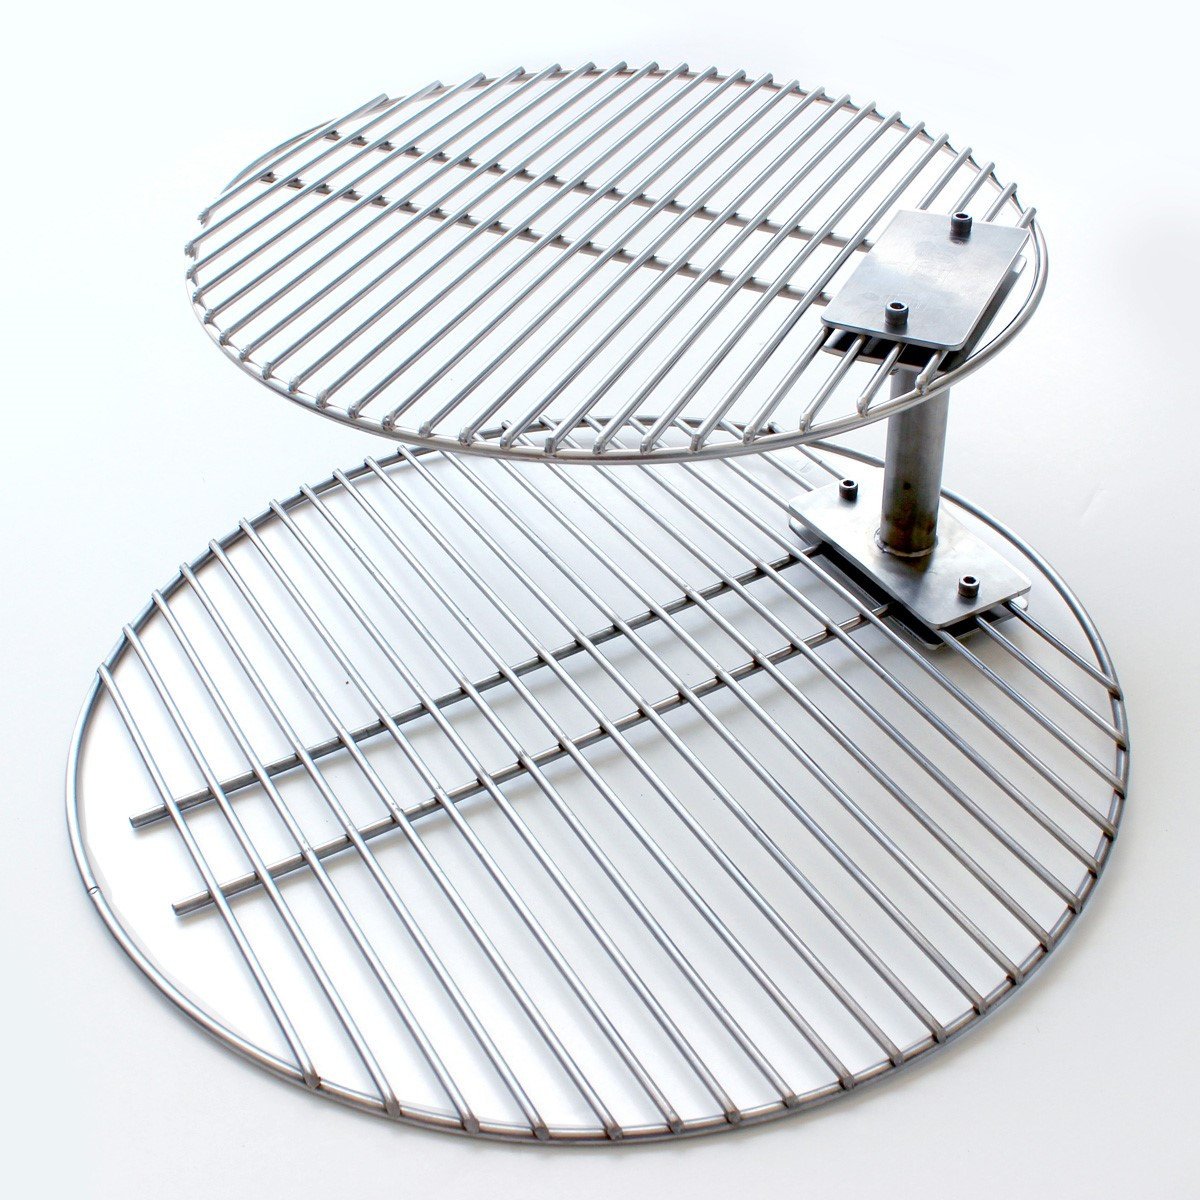 Grate Stacker + Grill Grate COMBO - Large